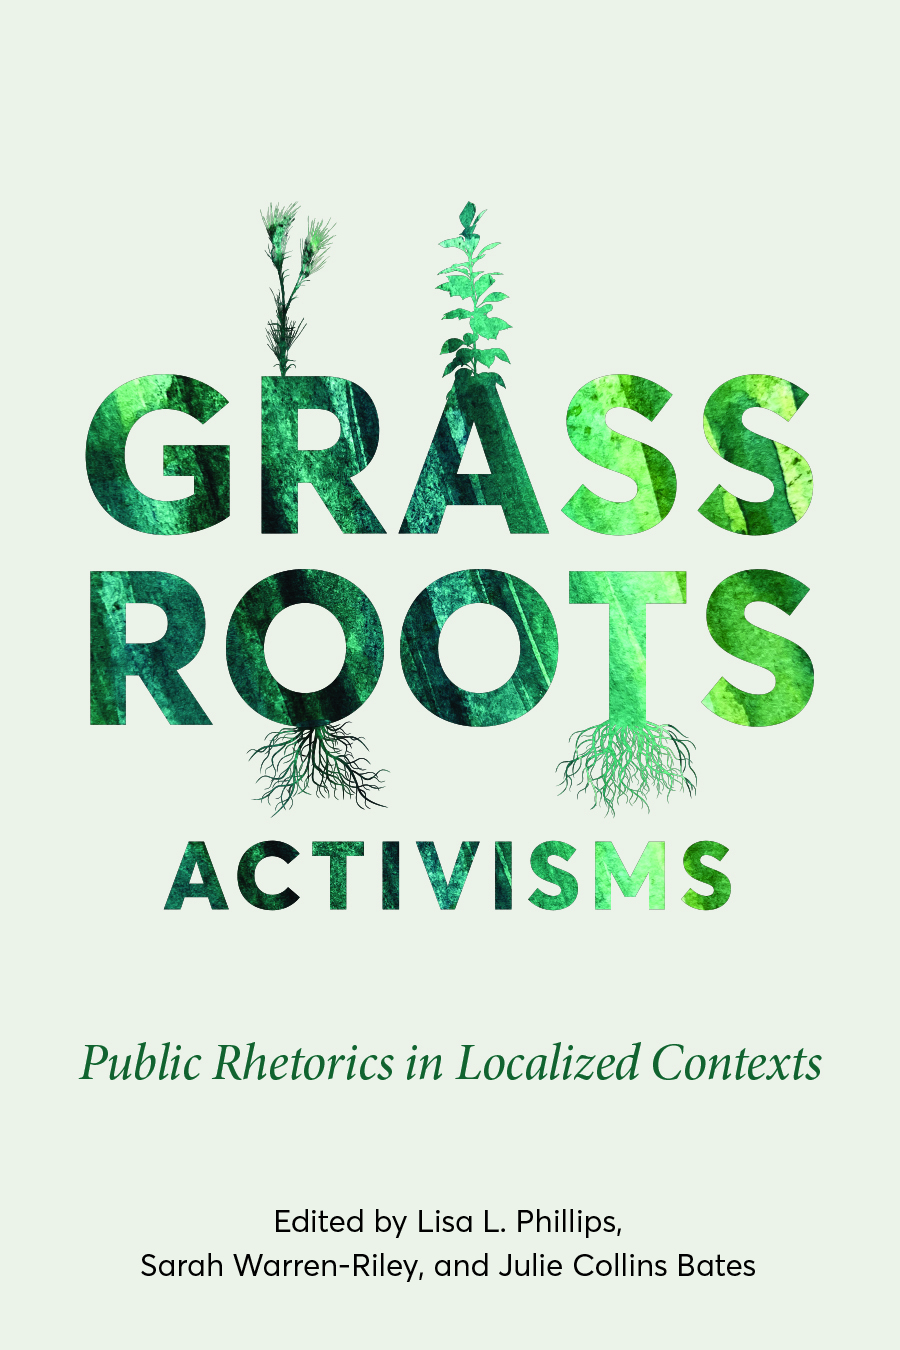 Front cover of Grassroots Activisms: Public Rhetorics in Localized Contexts, edited by Lisa L. Phillips, Sarah Warren-Riley, and Julie Collins Bates, with plant stems and roots emerging from the letters in Grassroots.